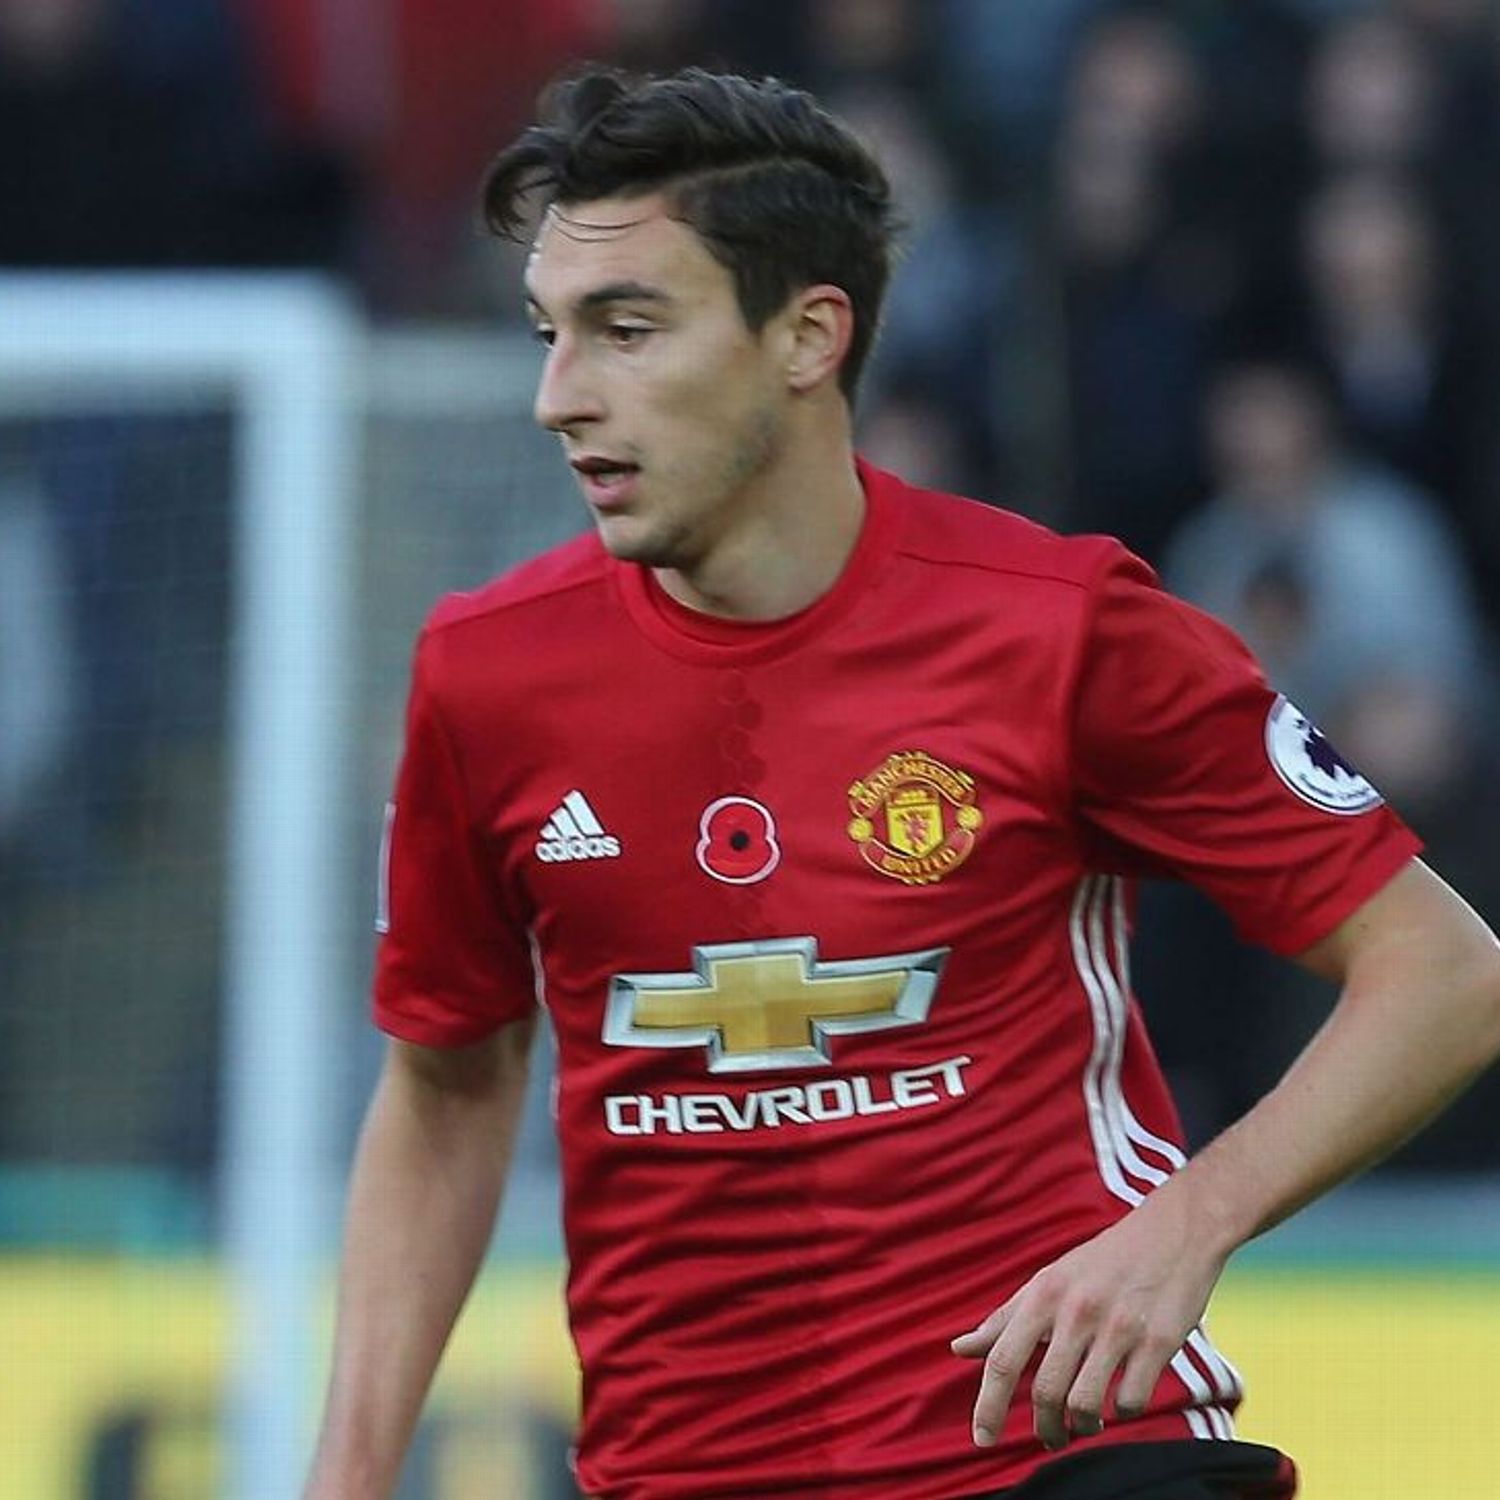 Manchester United right-back Matteo Darmian doubts claims Jose Mourinho wants to sell him